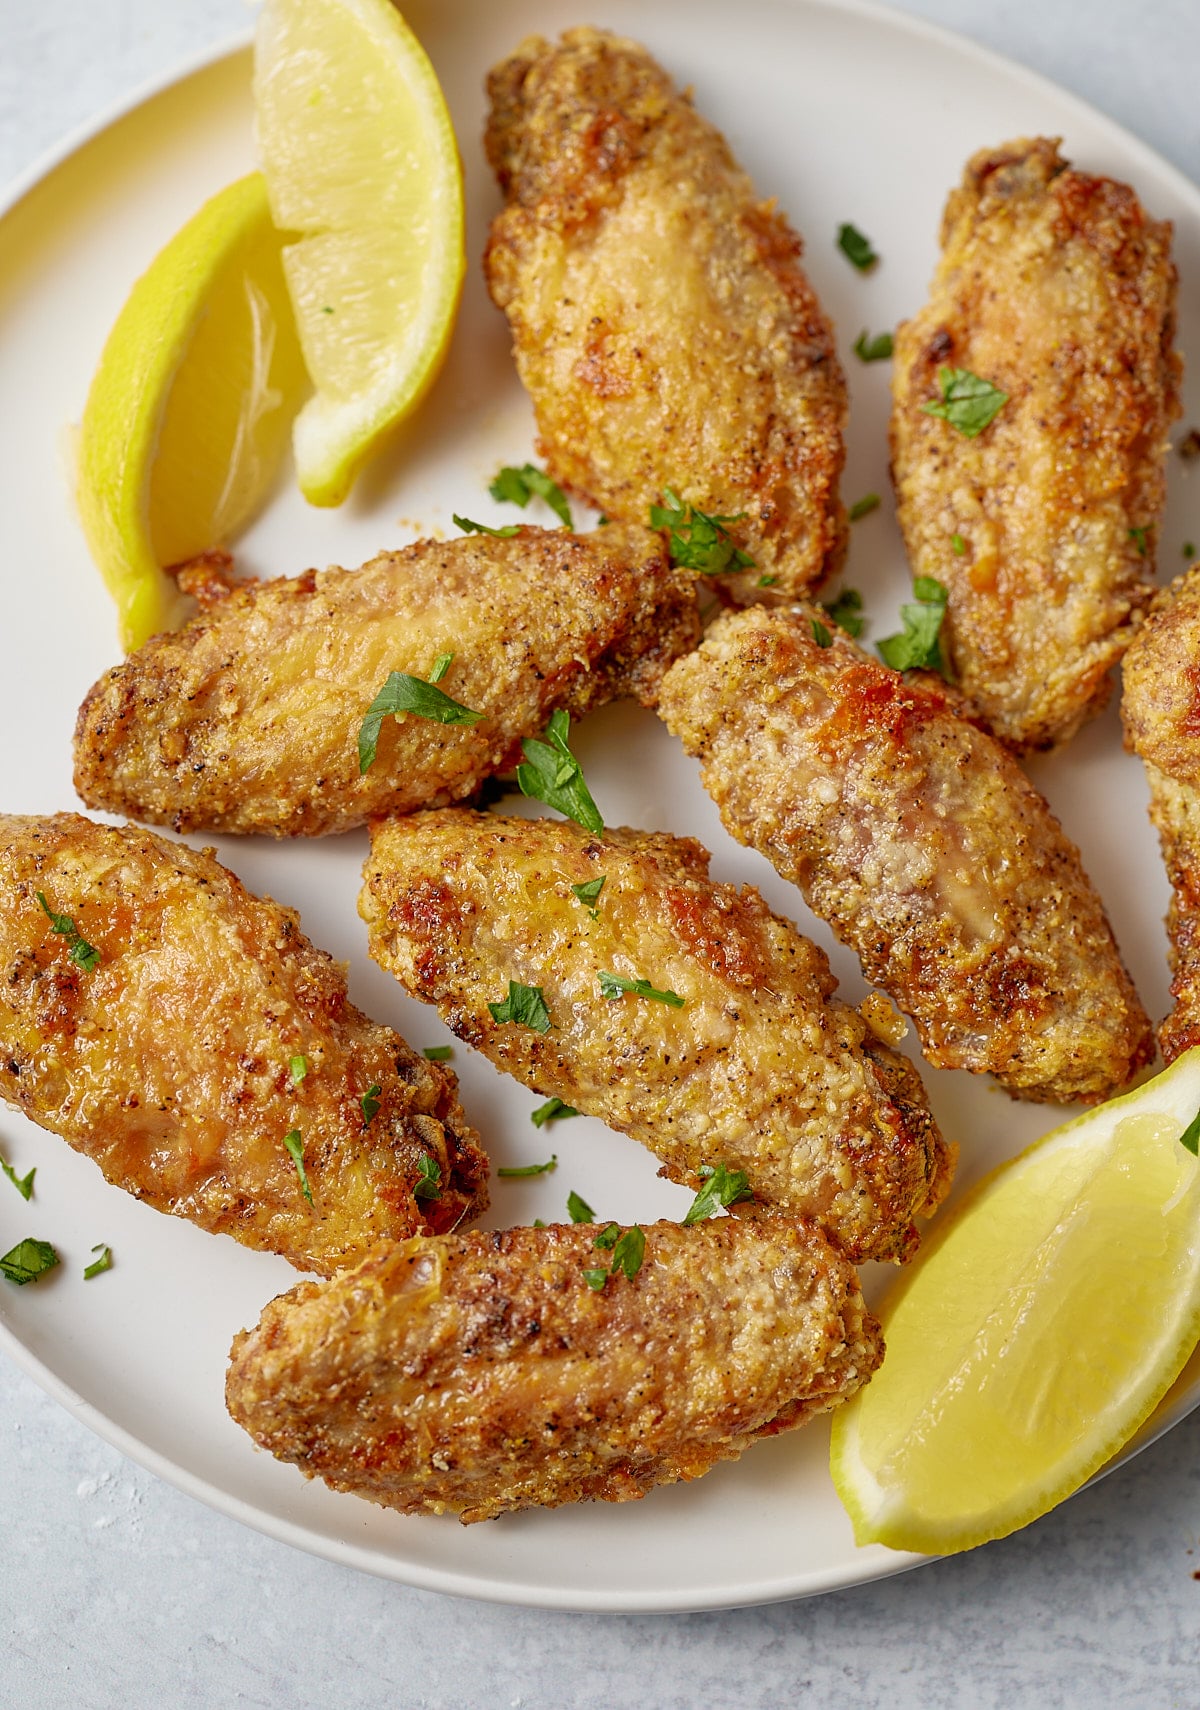 Lemon pepper wings served on a plate with lemon wedges.